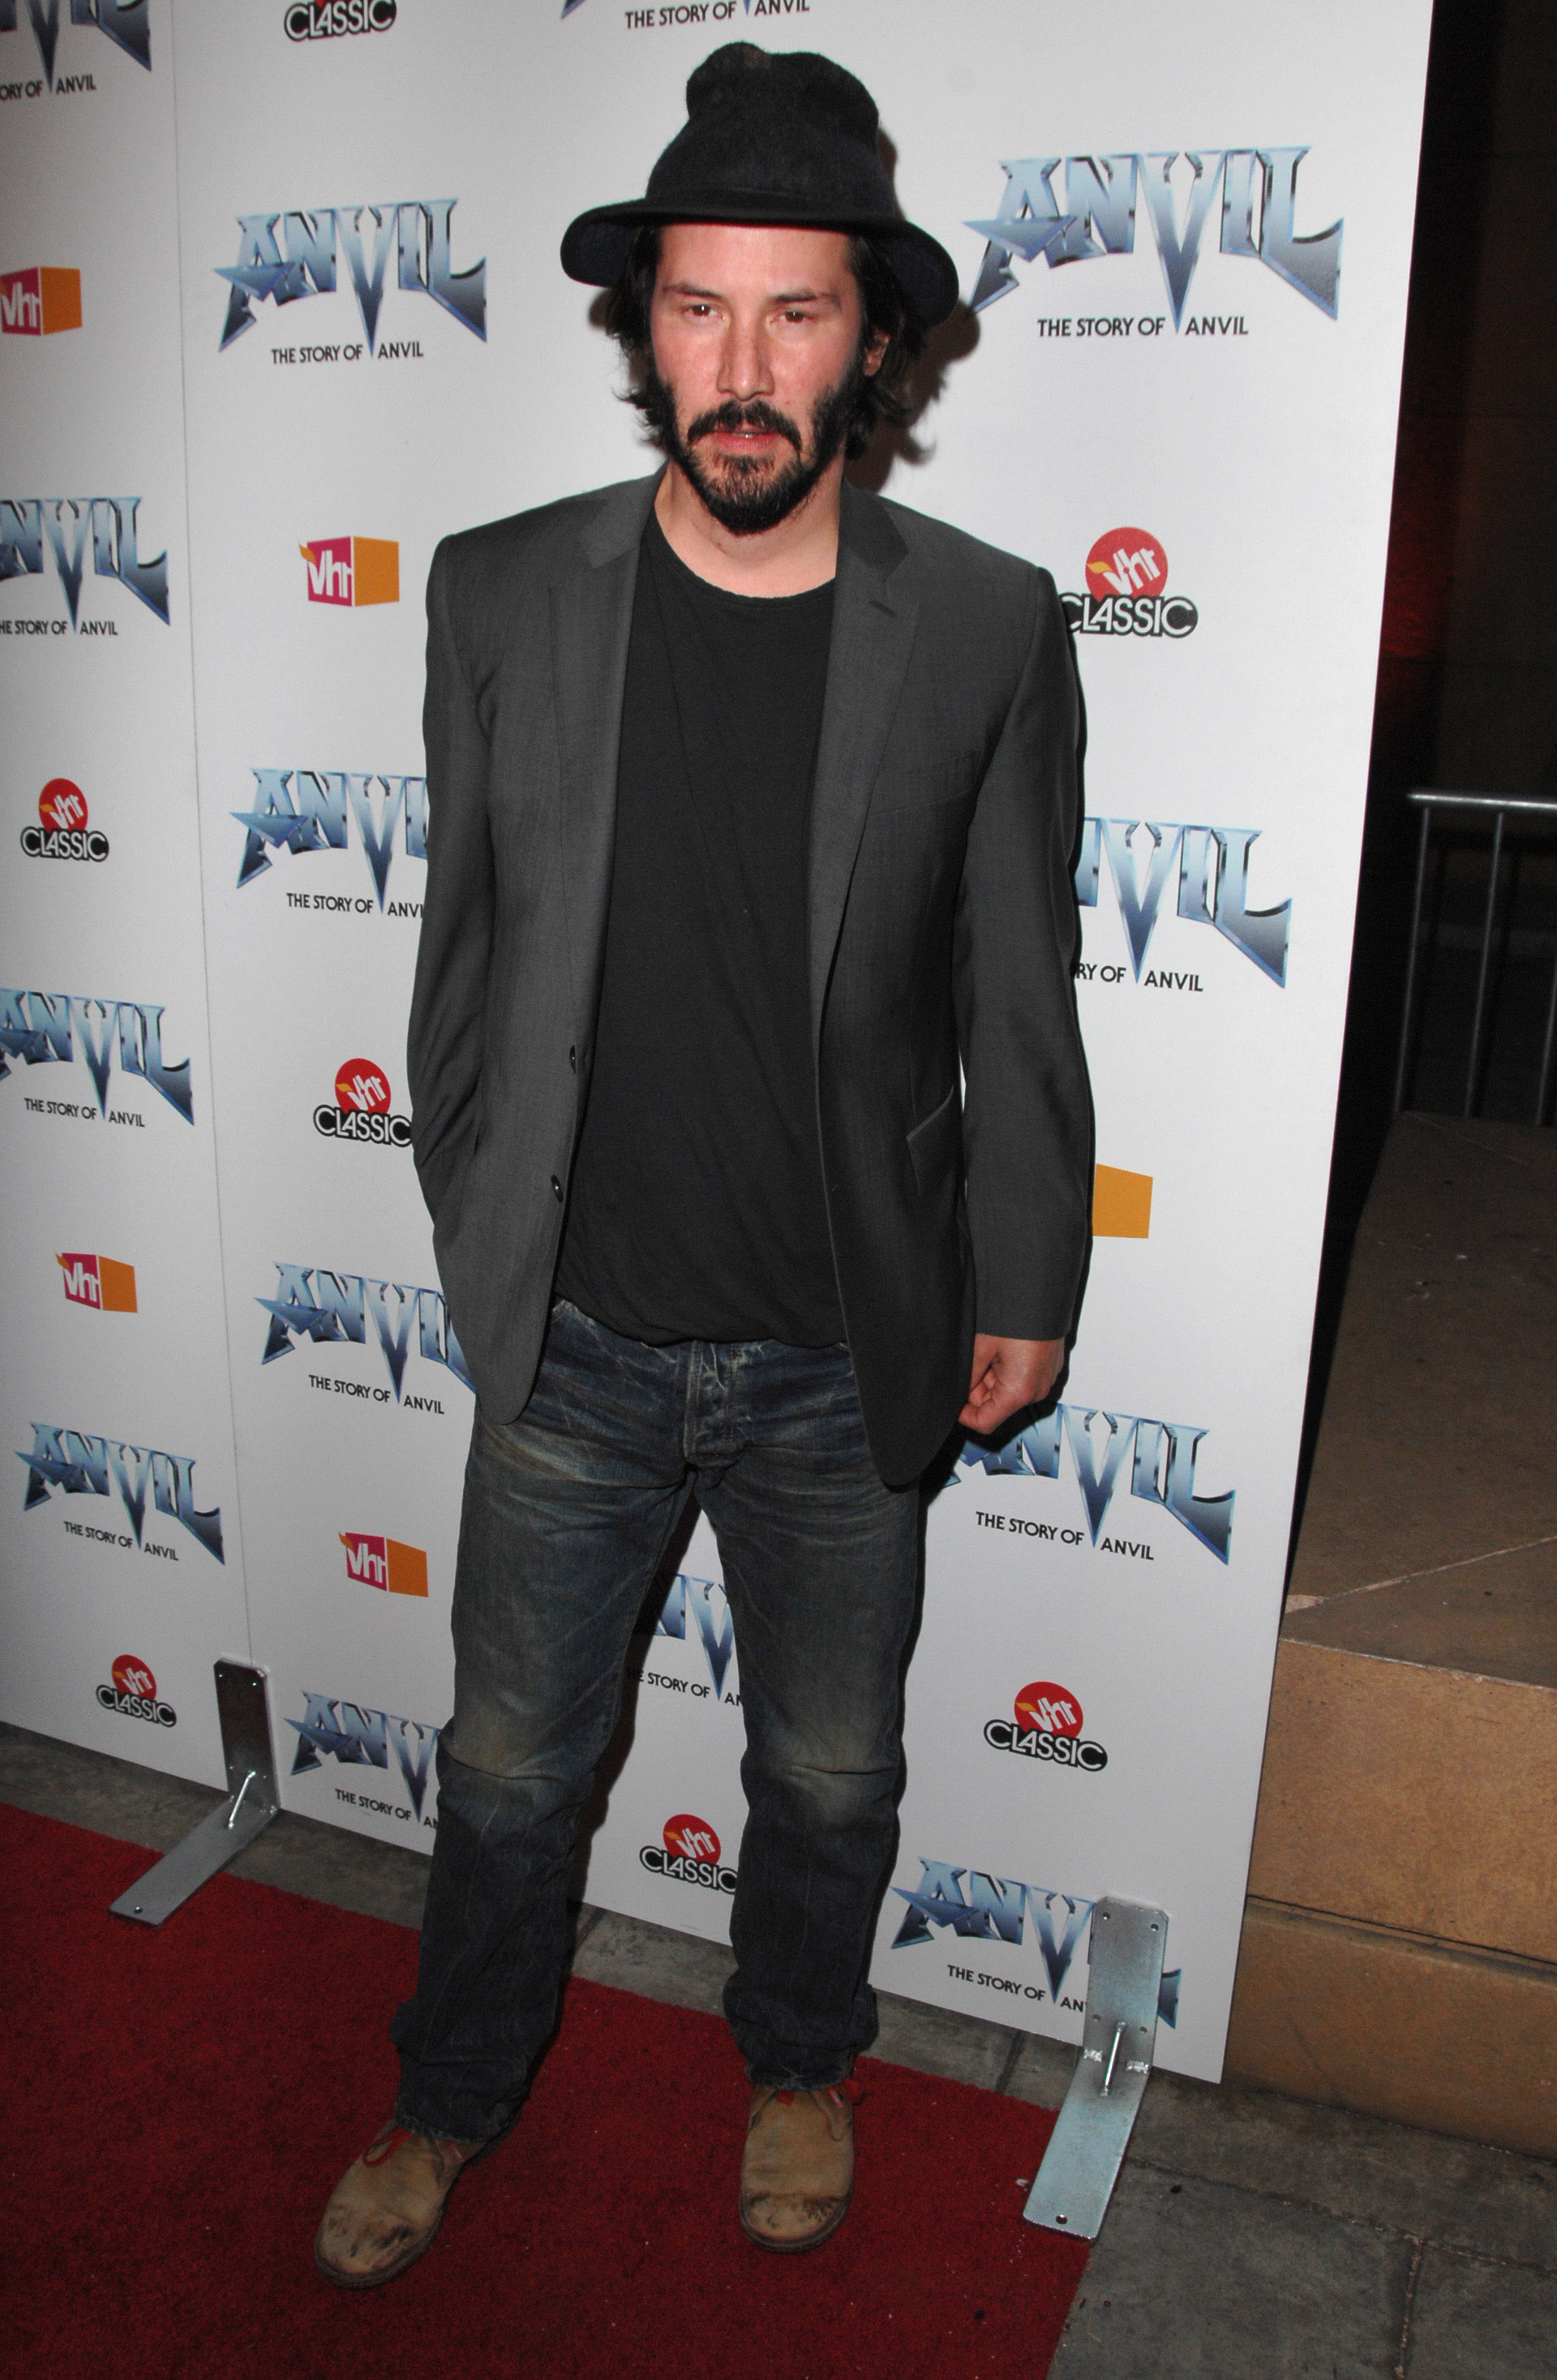 Keanu Reeves arrives at the premiere of "Anvil! The Story Of Anvil" at The Egyptian Theatre in Los Angeles, California, on April 7, 2009. | Source: Getty Images